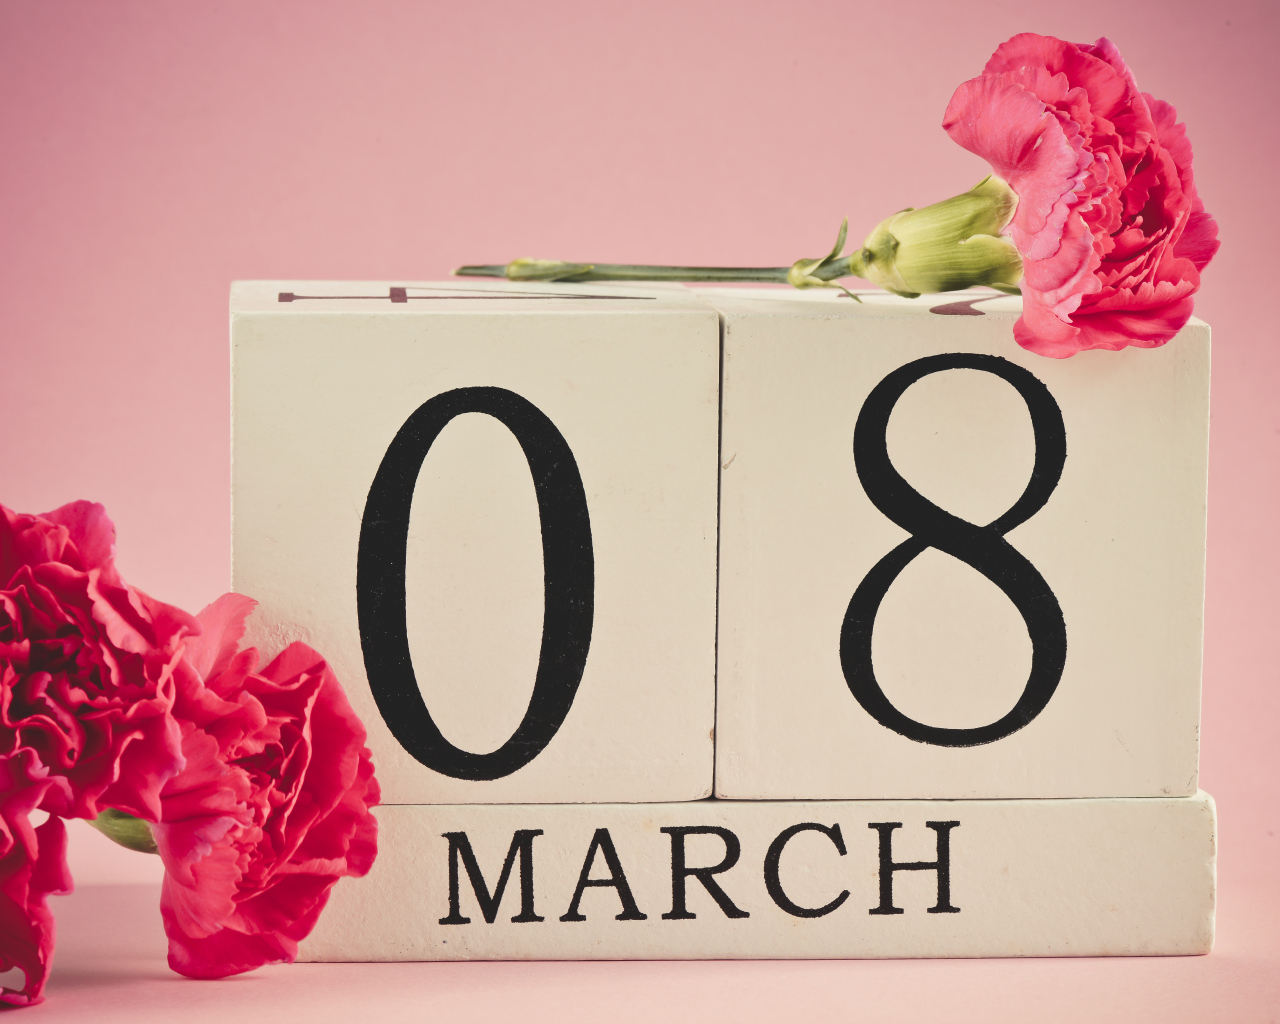 Pink carnations as a gift for March 8